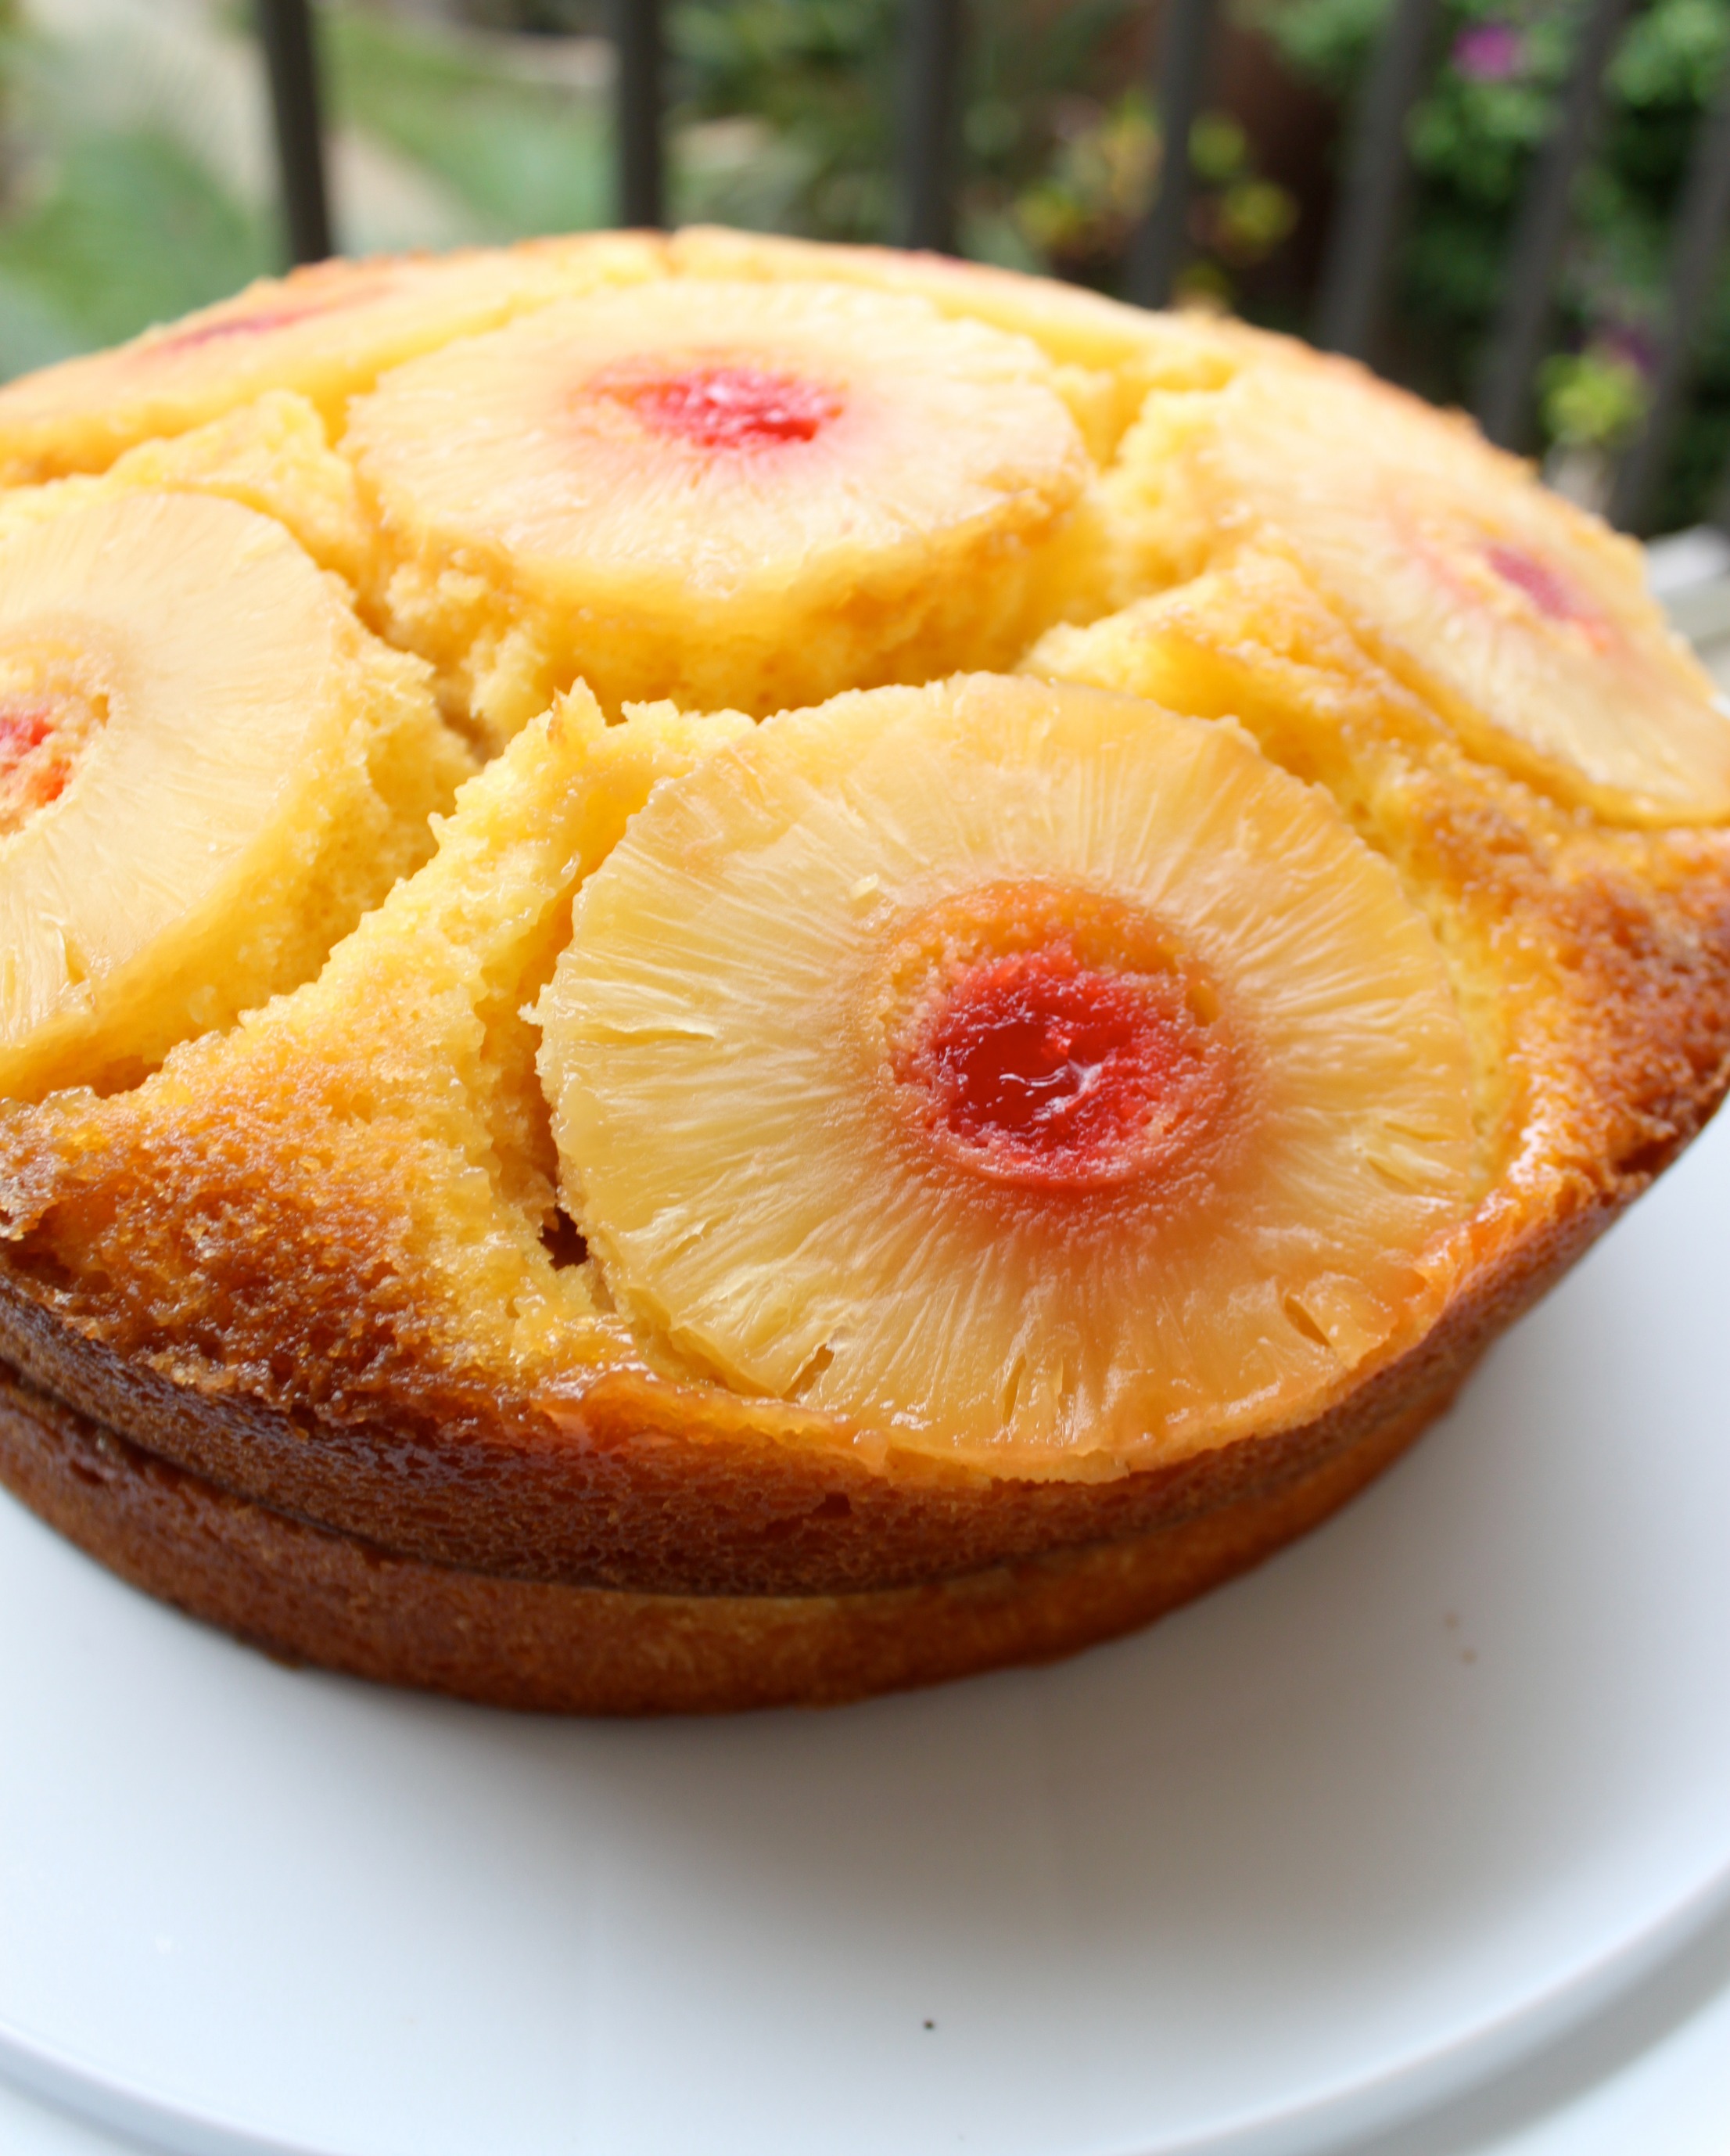 National Pineapple Upside-Down Cake Day | Pineapple Upside-Down Cake